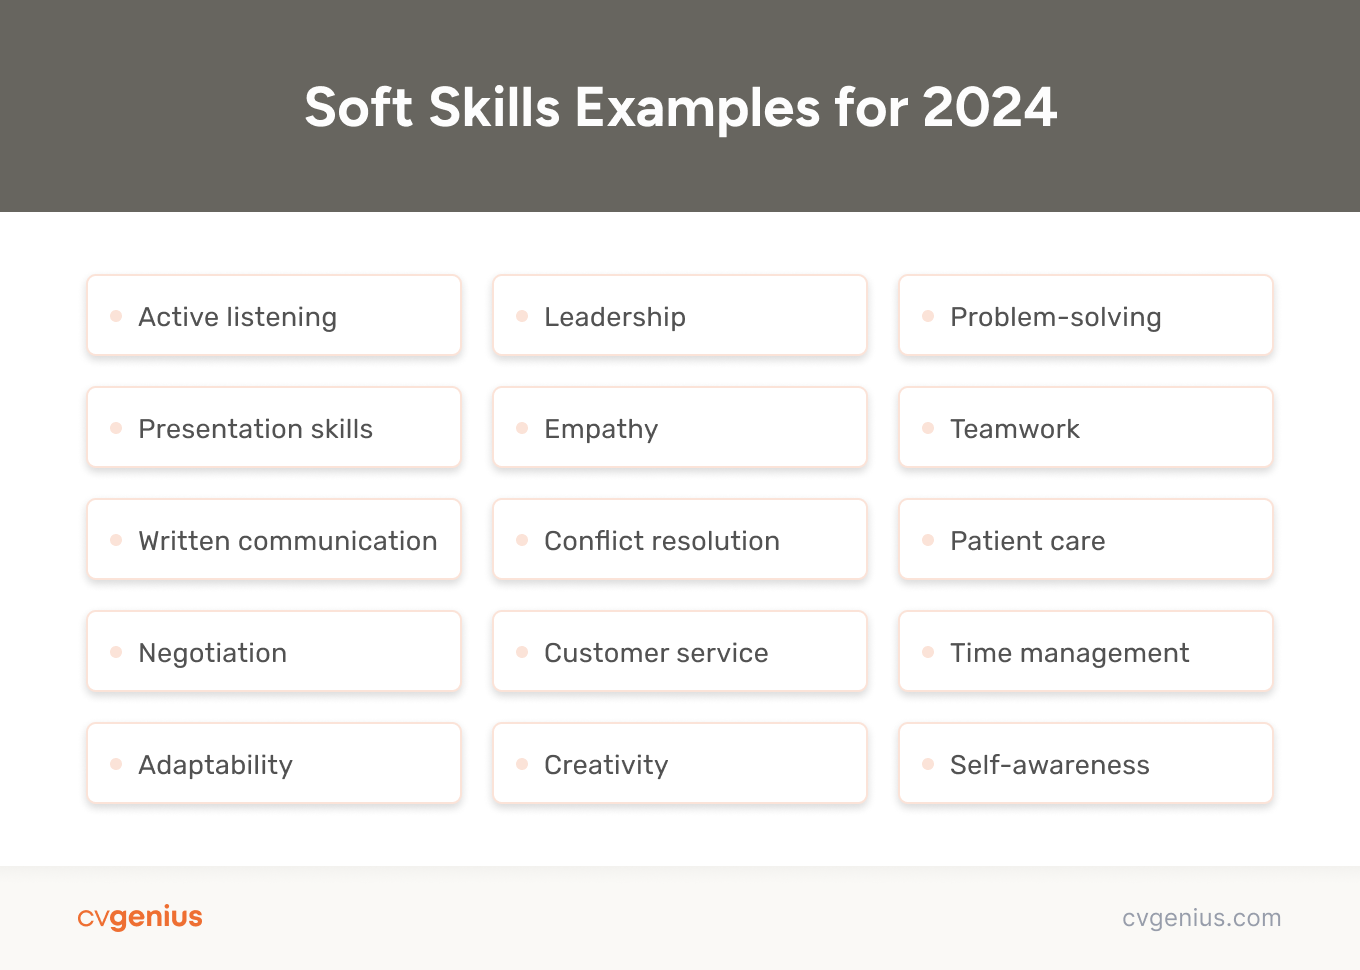 An infographic showing 15 soft skills that are useful to put on a CV in 2024.